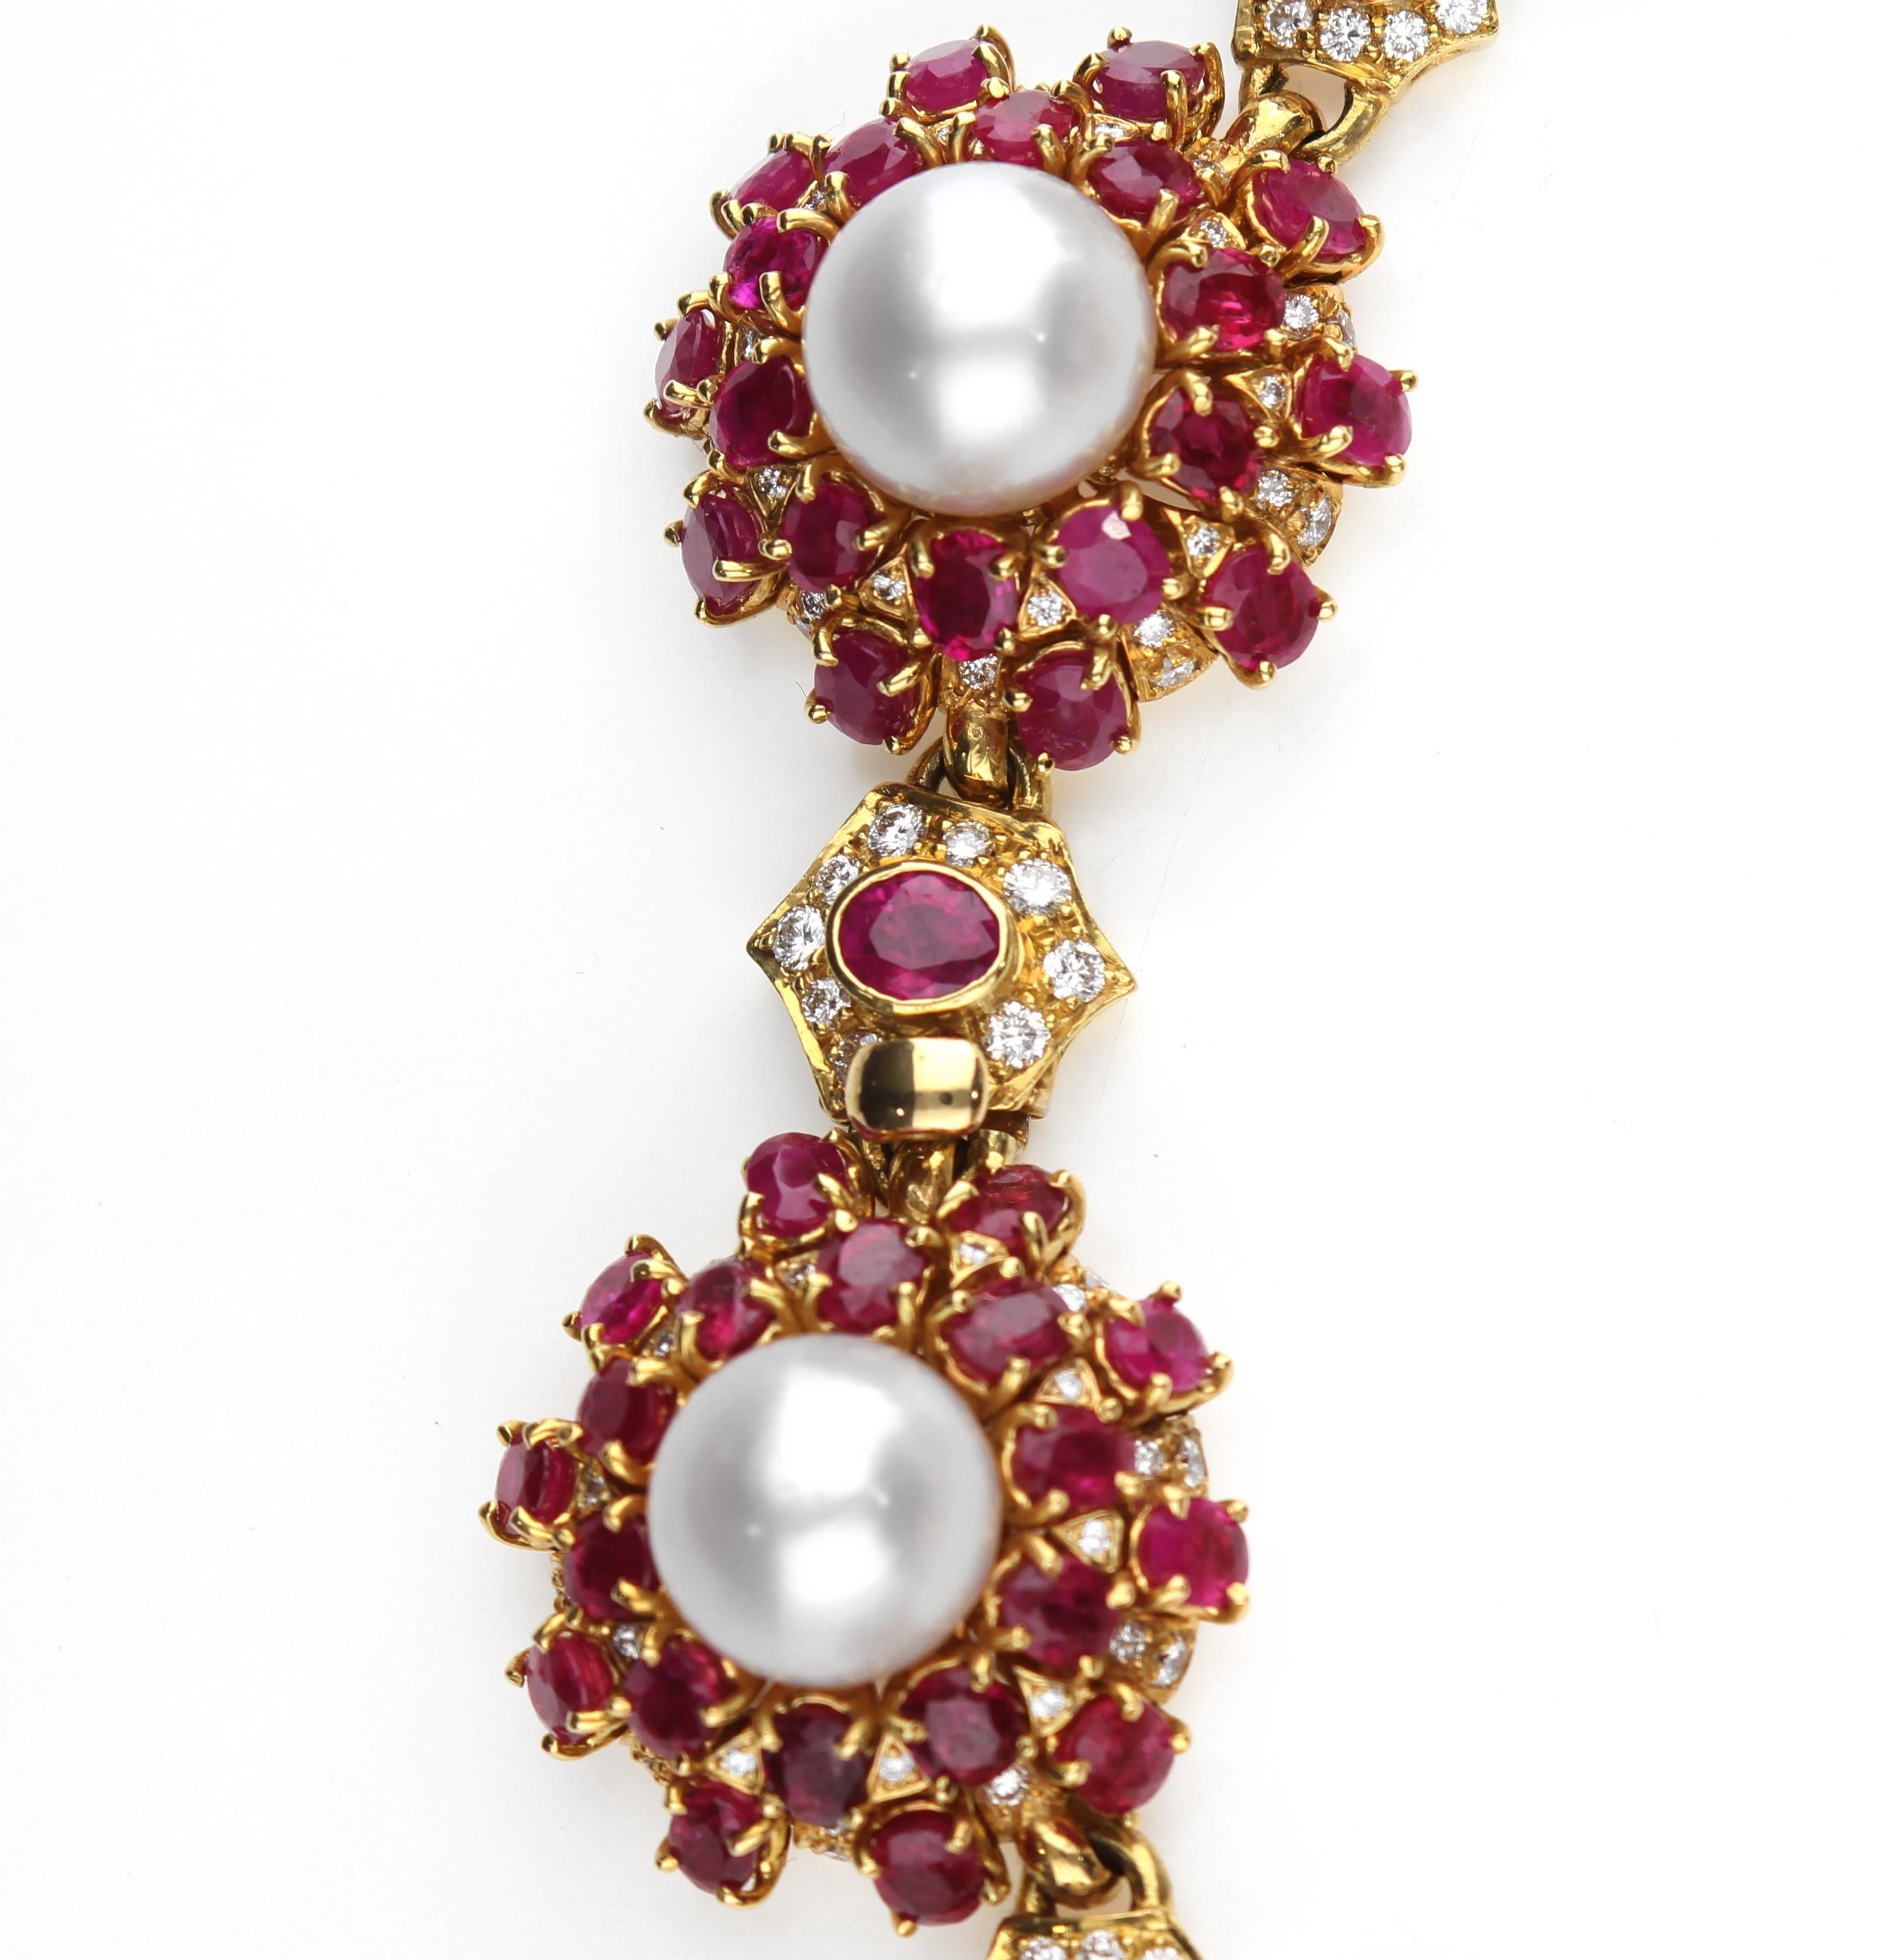 Parure with Rubies, Pearls and Diamonds in 18 Karat Yellow Gold 5